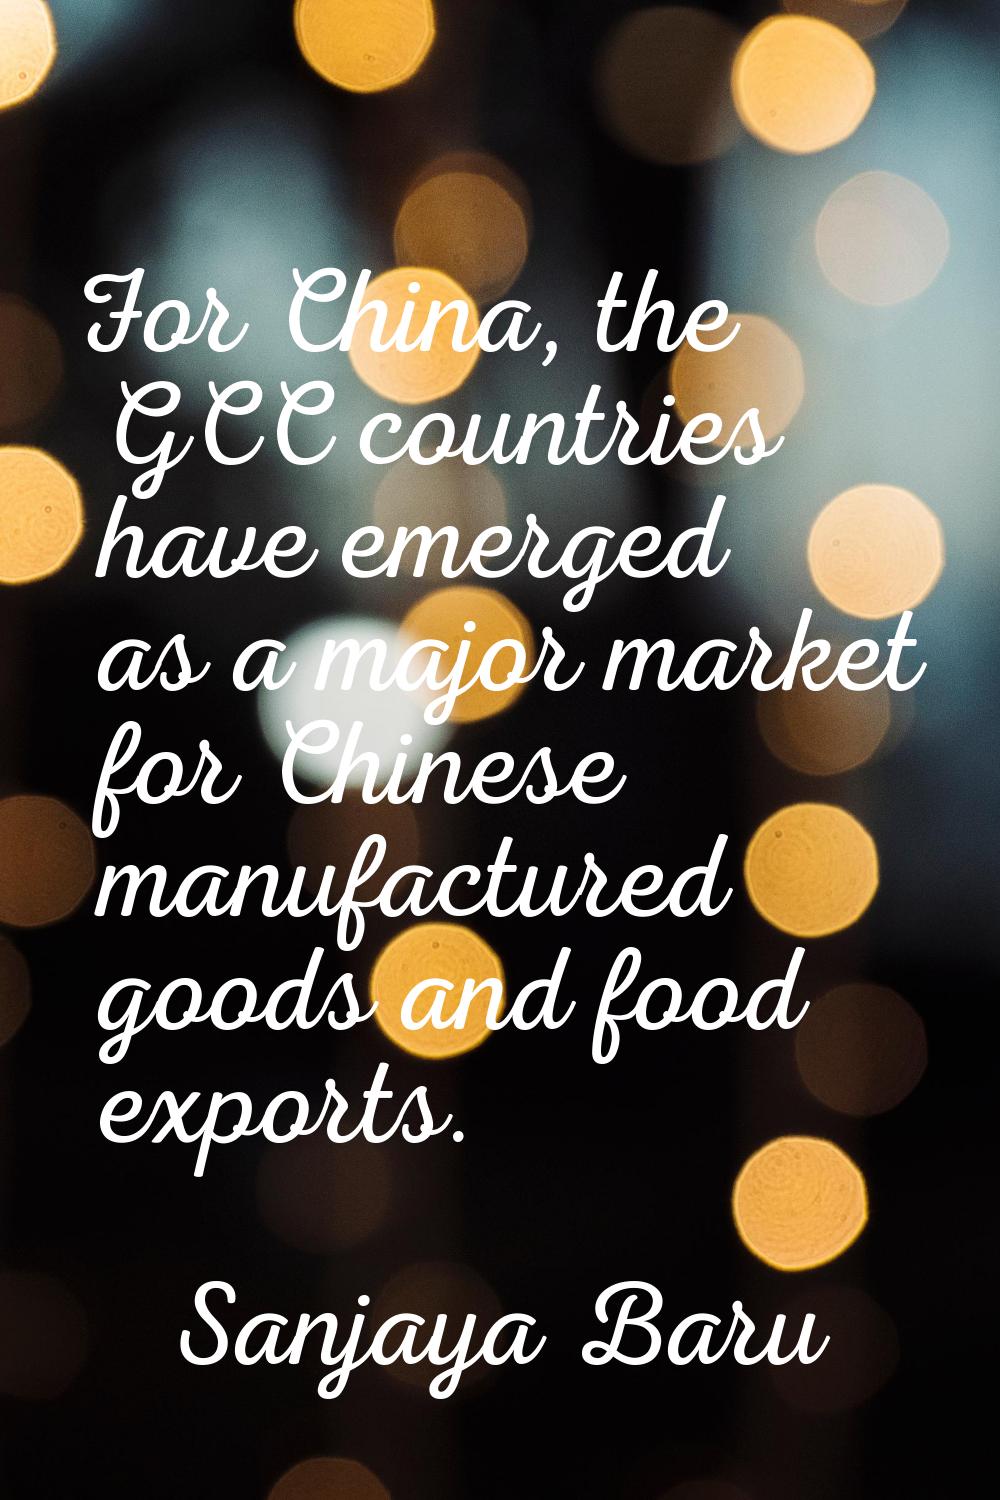 For China, the GCC countries have emerged as a major market for Chinese manufactured goods and food